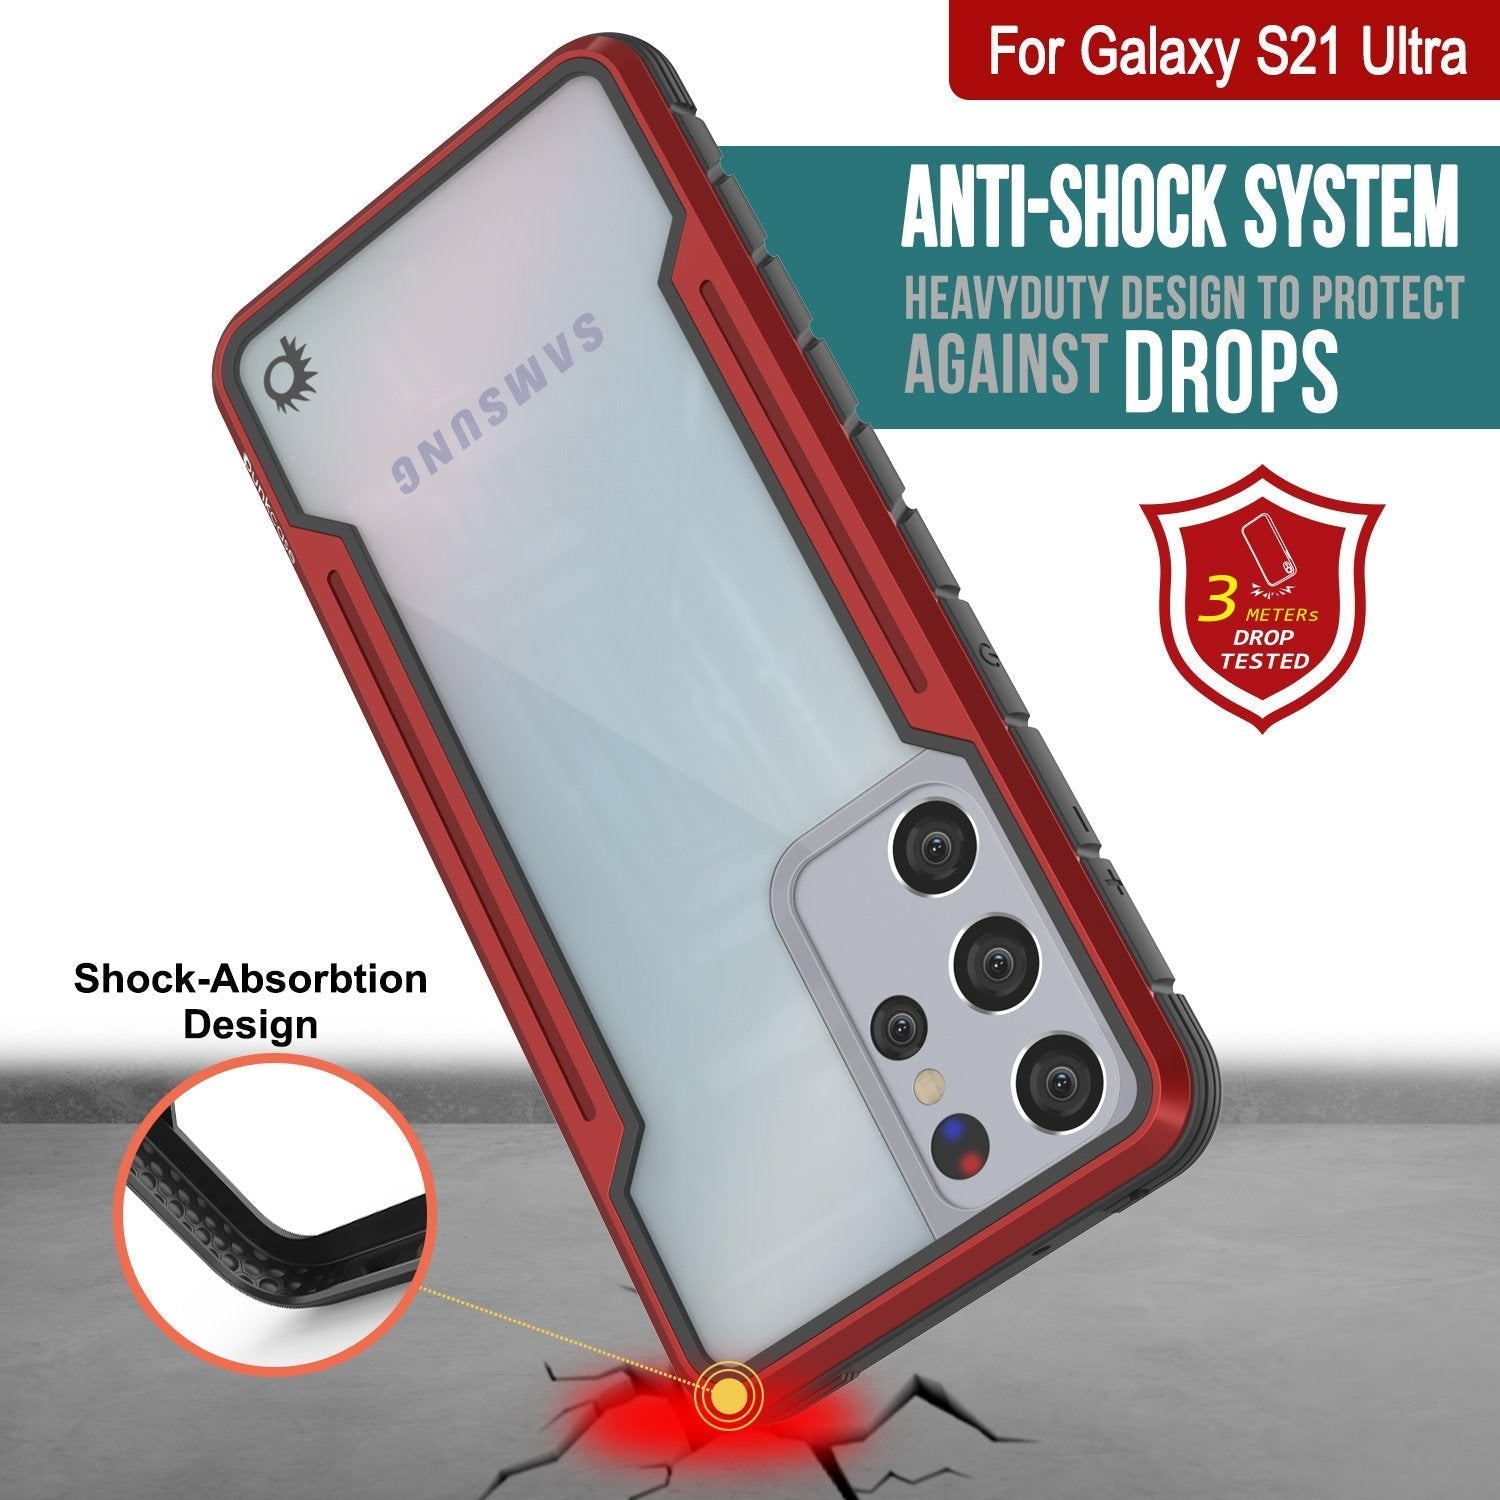 Punkcase S21 Ultra ravenger Case Protective Military Grade Multilayer Cover [Red]